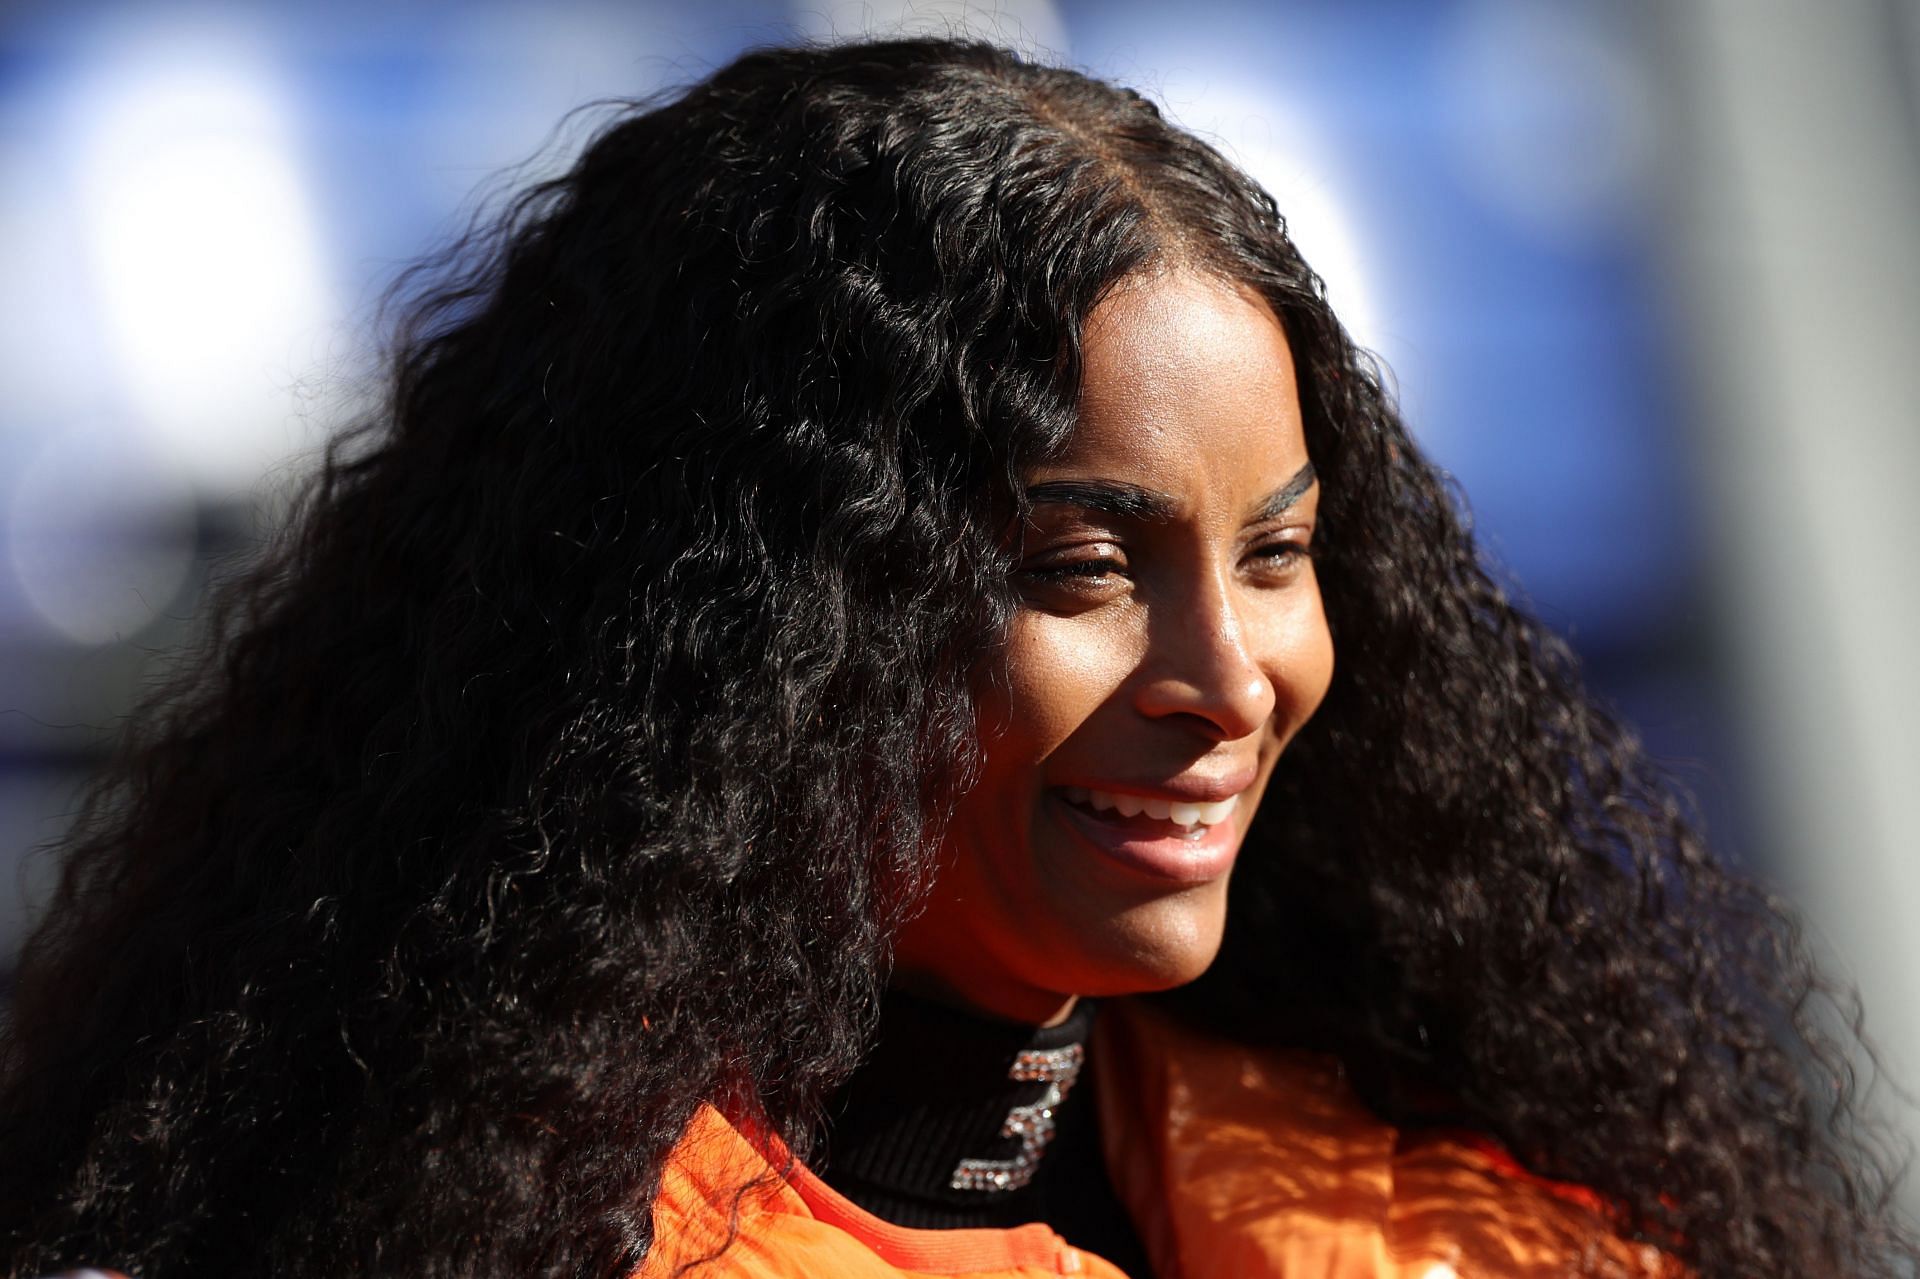 Ciara Wilson left fans stunned with her performance at Coachella